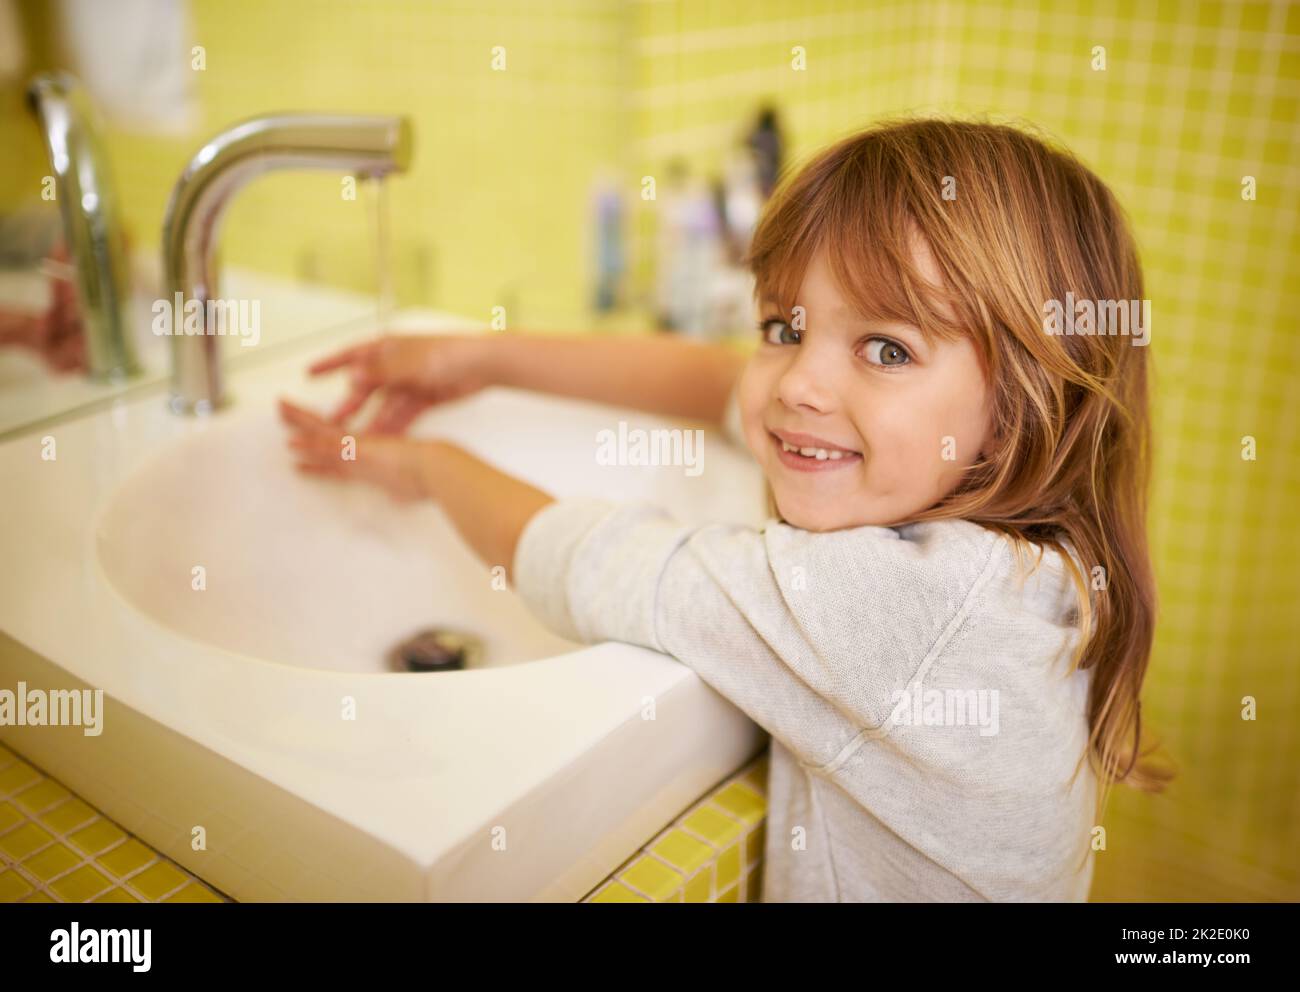 I can reach the tap now. A cute little girl washing her hands in the bathroom basin. Stock Photo